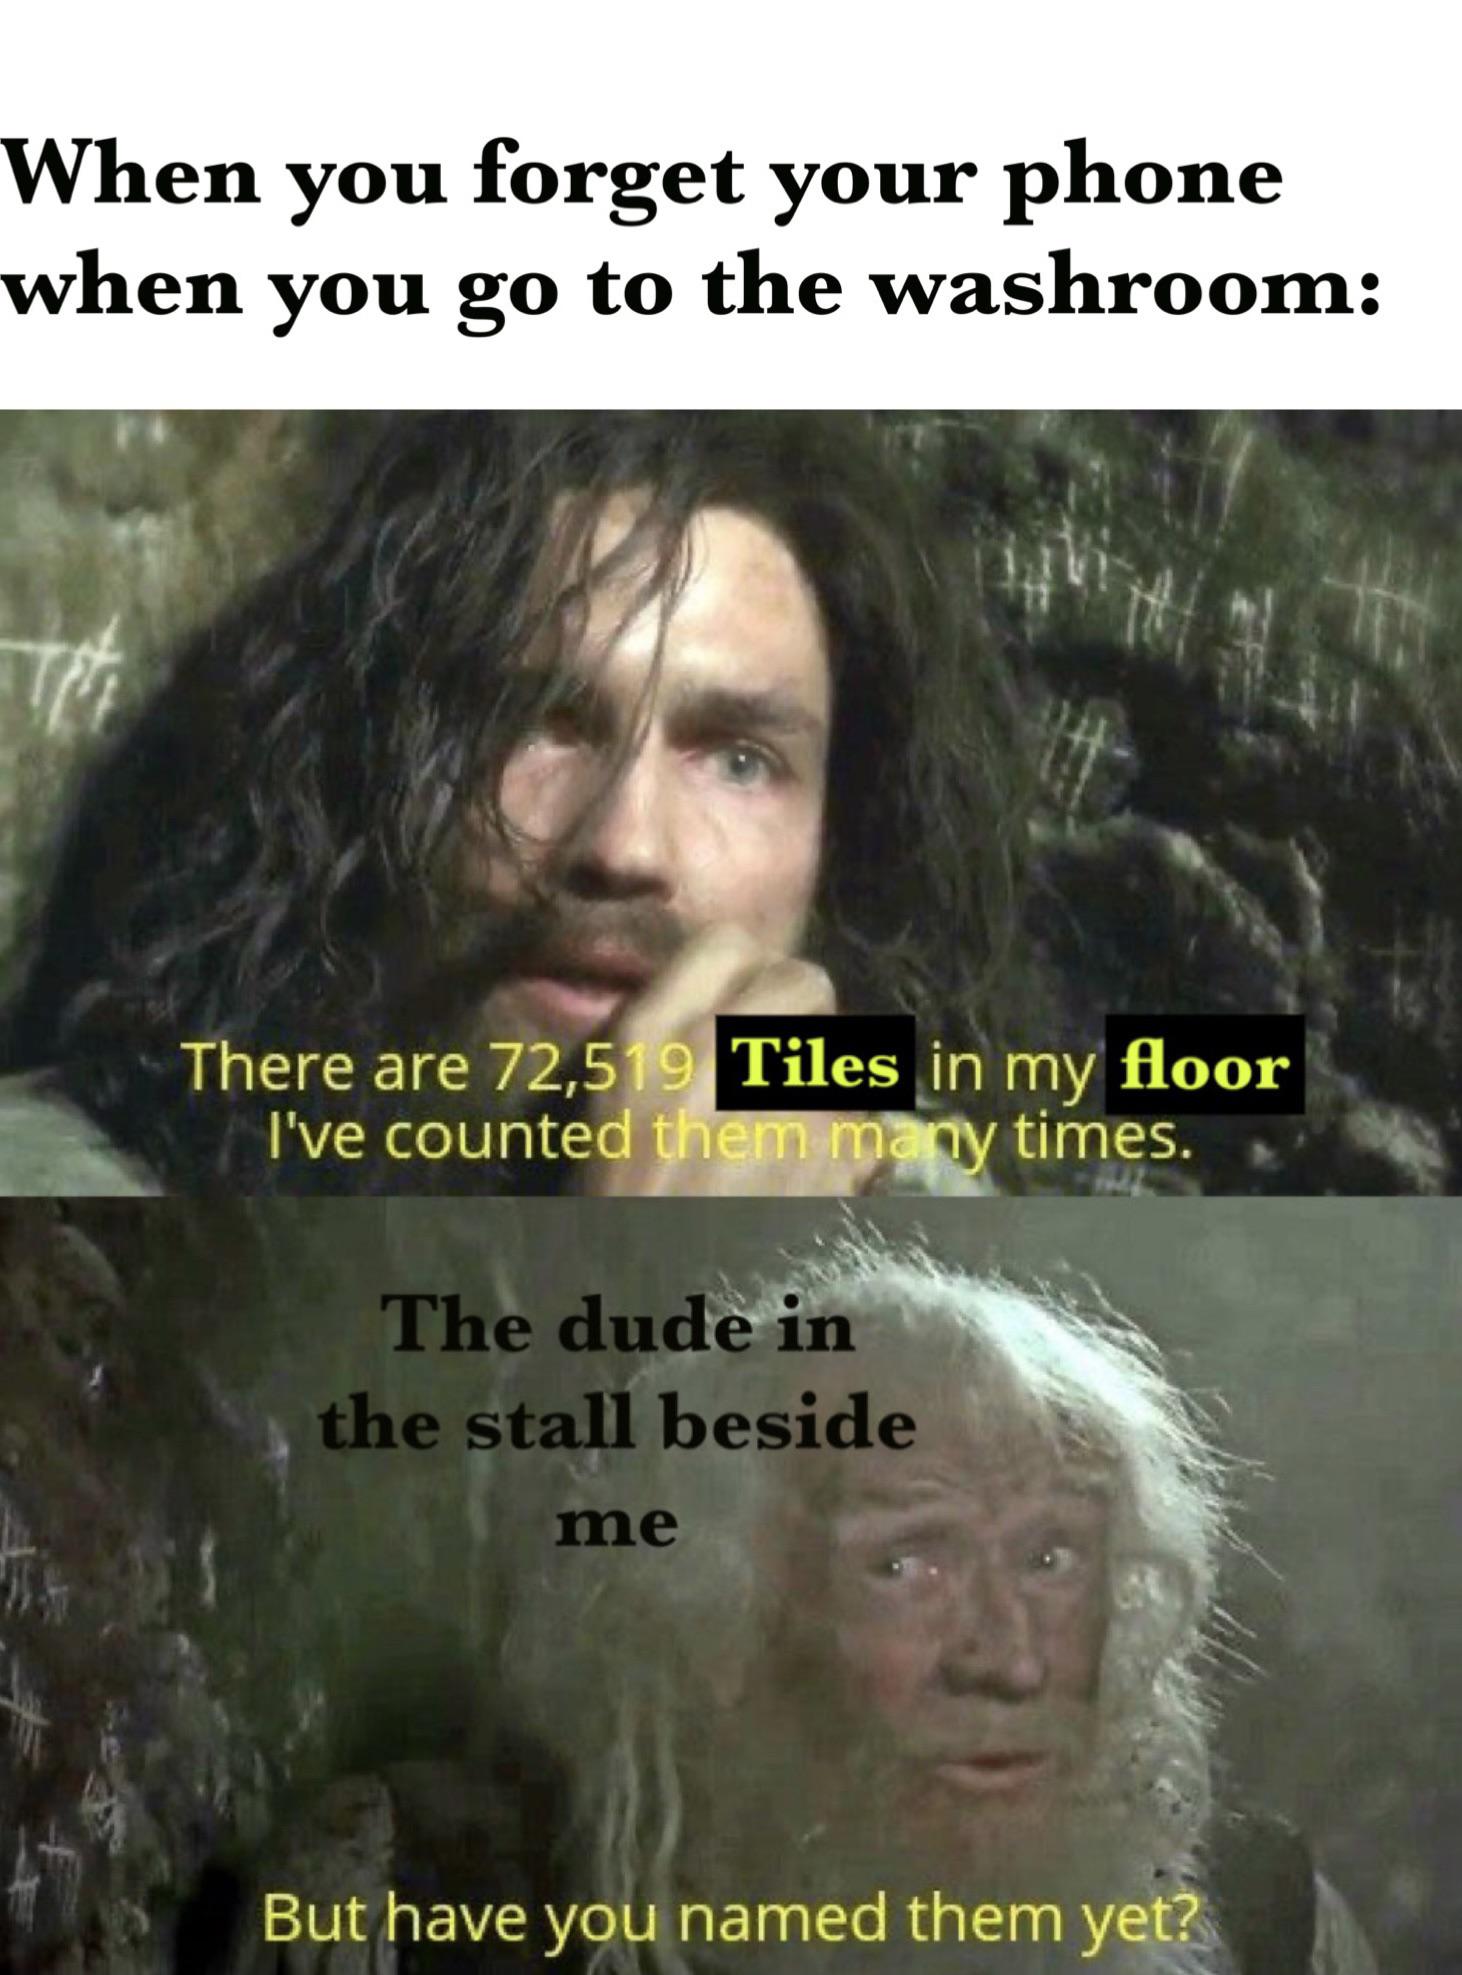 dank memes - funny memes - photo caption - When you forget your phone when you go to the washroom There are 72,519 Tiles in my floor I've counted them many times. The dude in the stall beside me But have you named them yet?